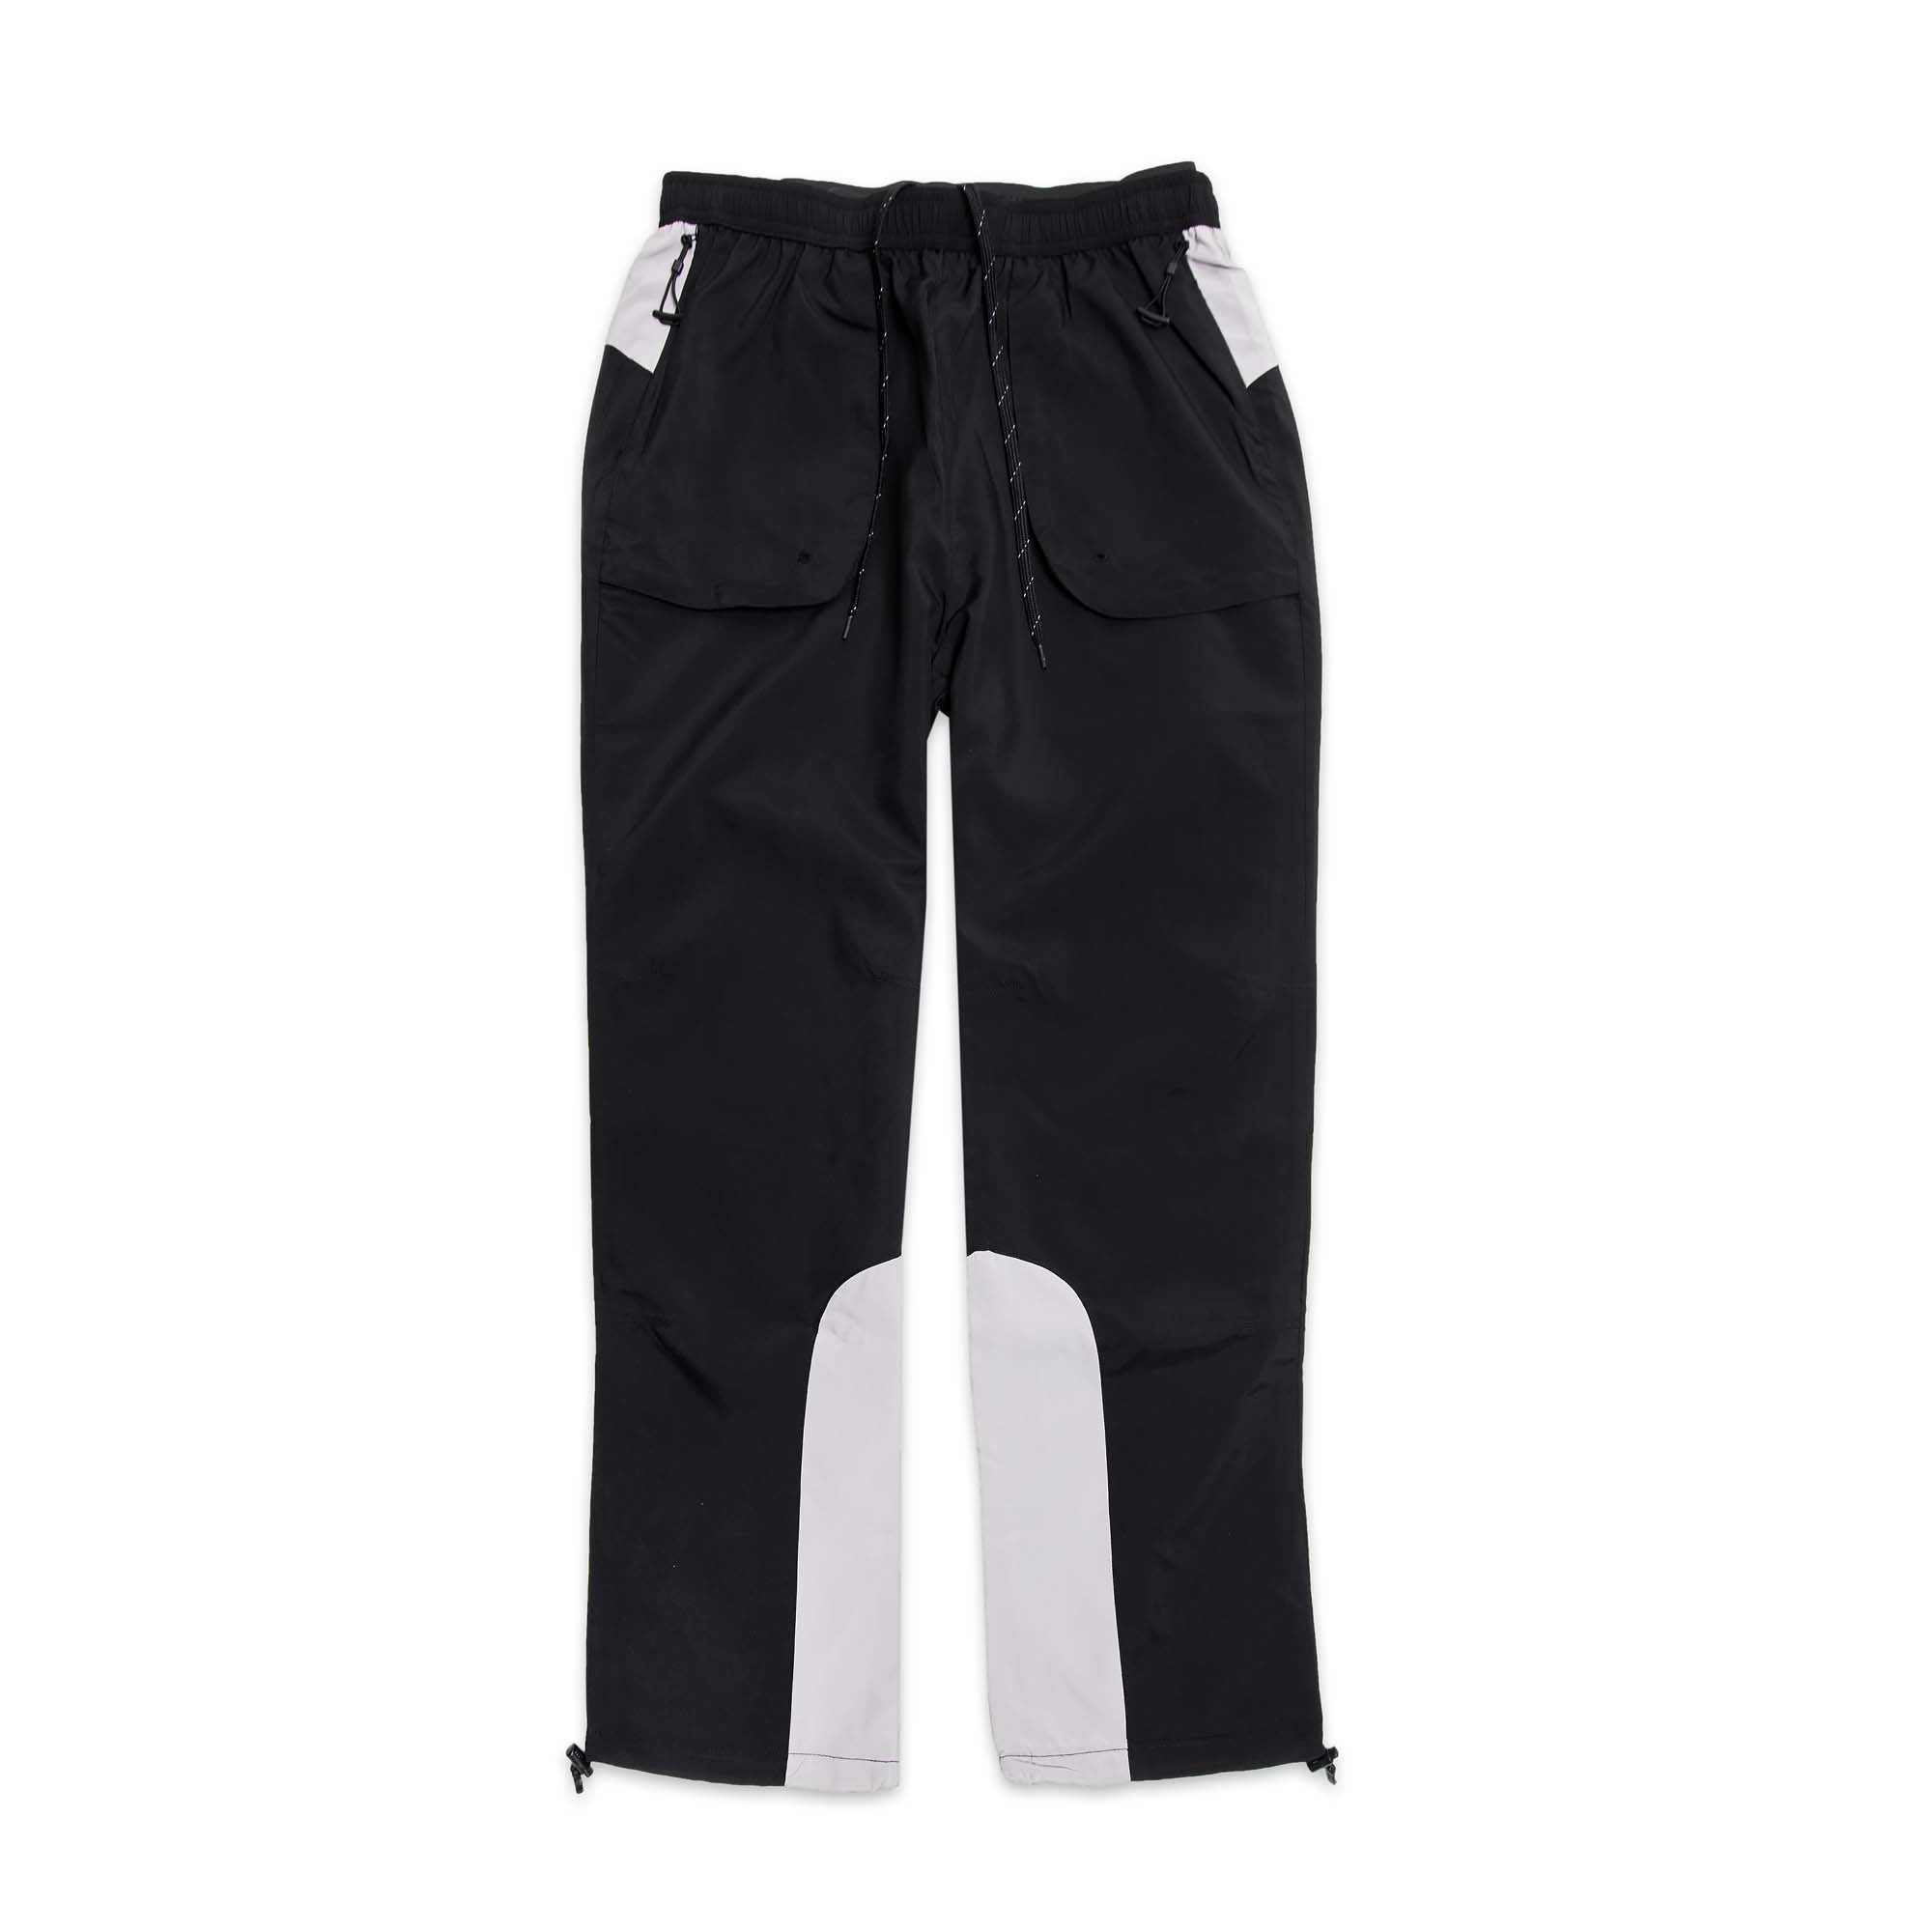 SOULLAND Mens Frey Pants – Extra Butter